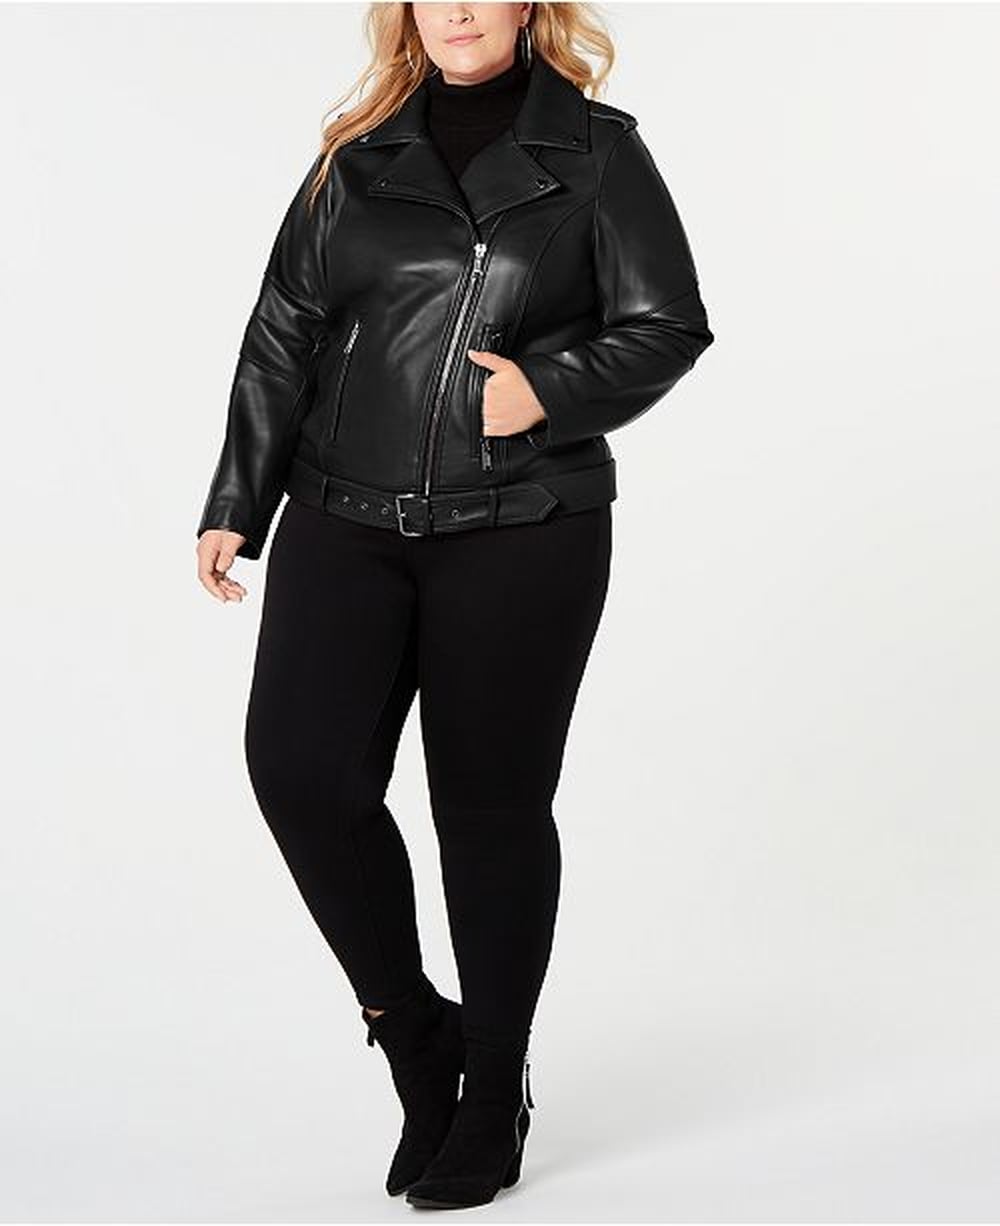 The Best Clothes for Plus Size Women at Macy's | POPSUGAR Fashion